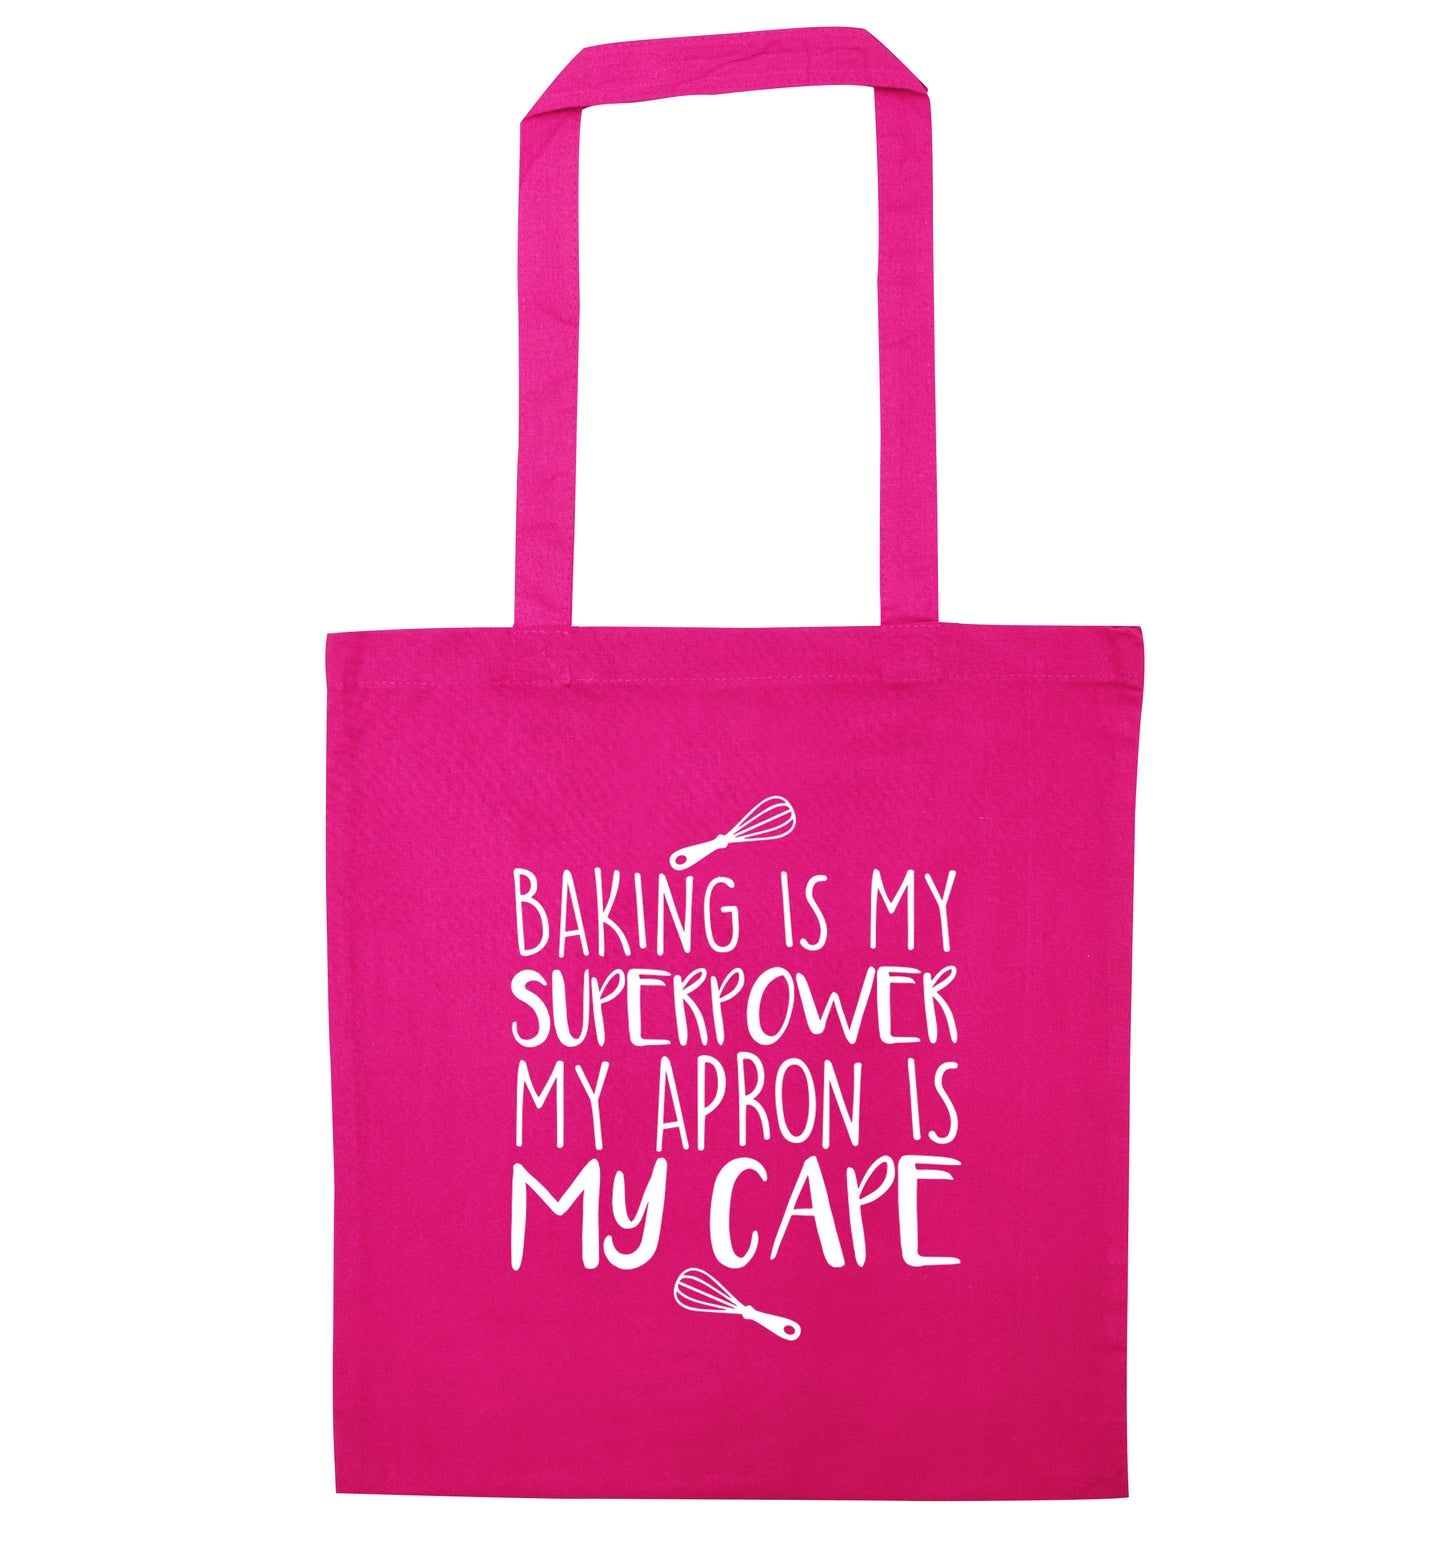 Baking is my superpower my apron is my cape pink tote bag